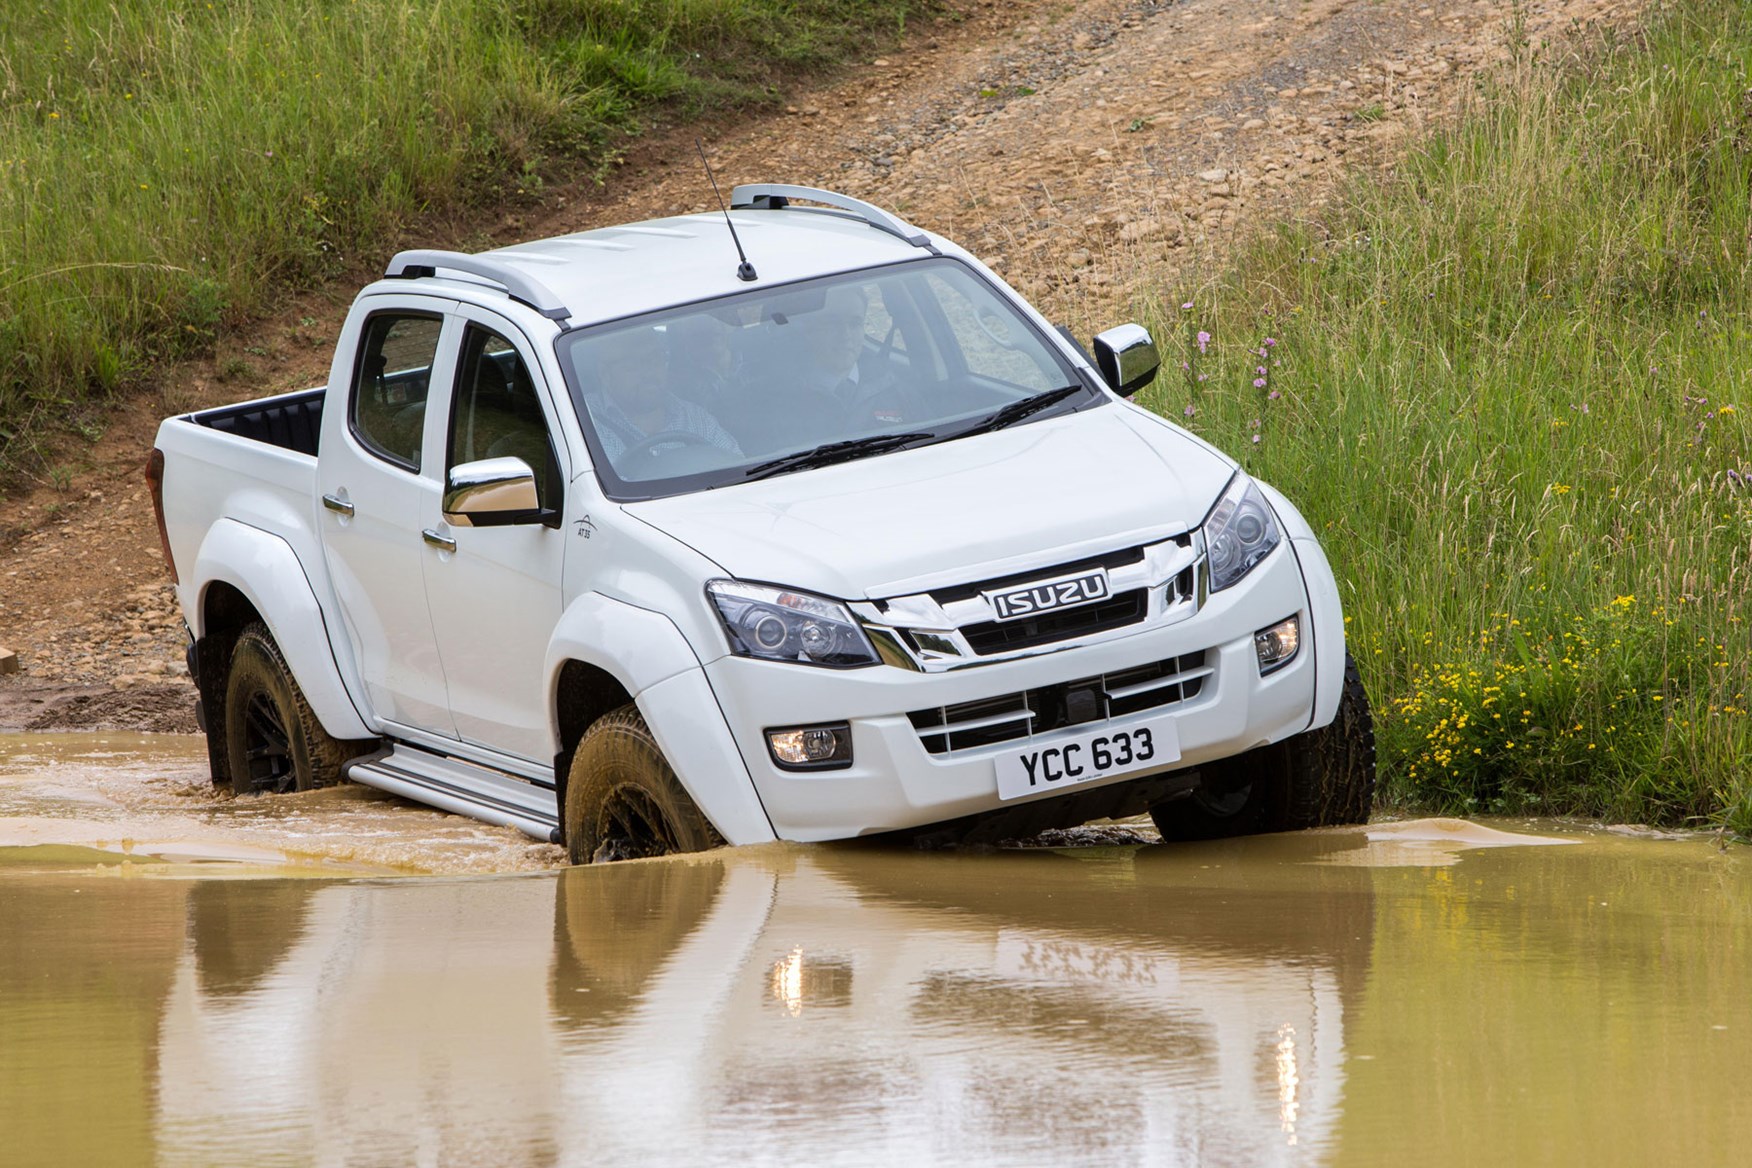 Isuzu D-Max AT35 2.5 review - front view, driving into water, white